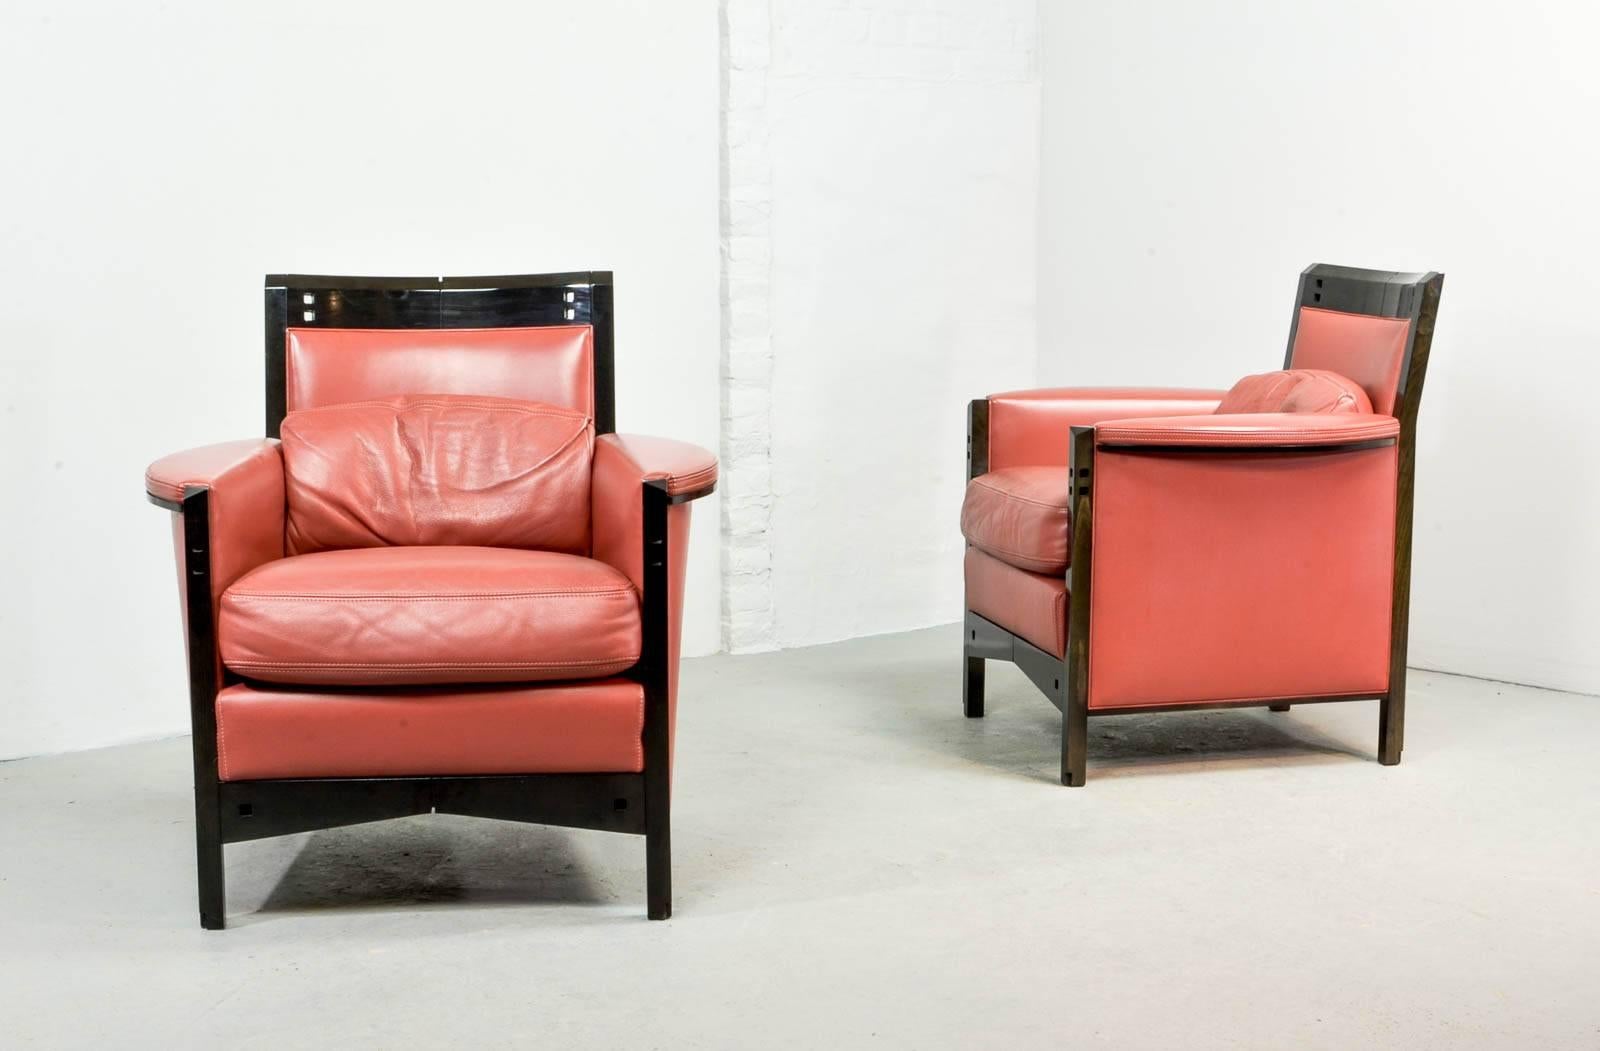 Lacquered Splendid Midcentury Pair of Giorgetti Lounge Chairs by Umberto Asnago, 1980s